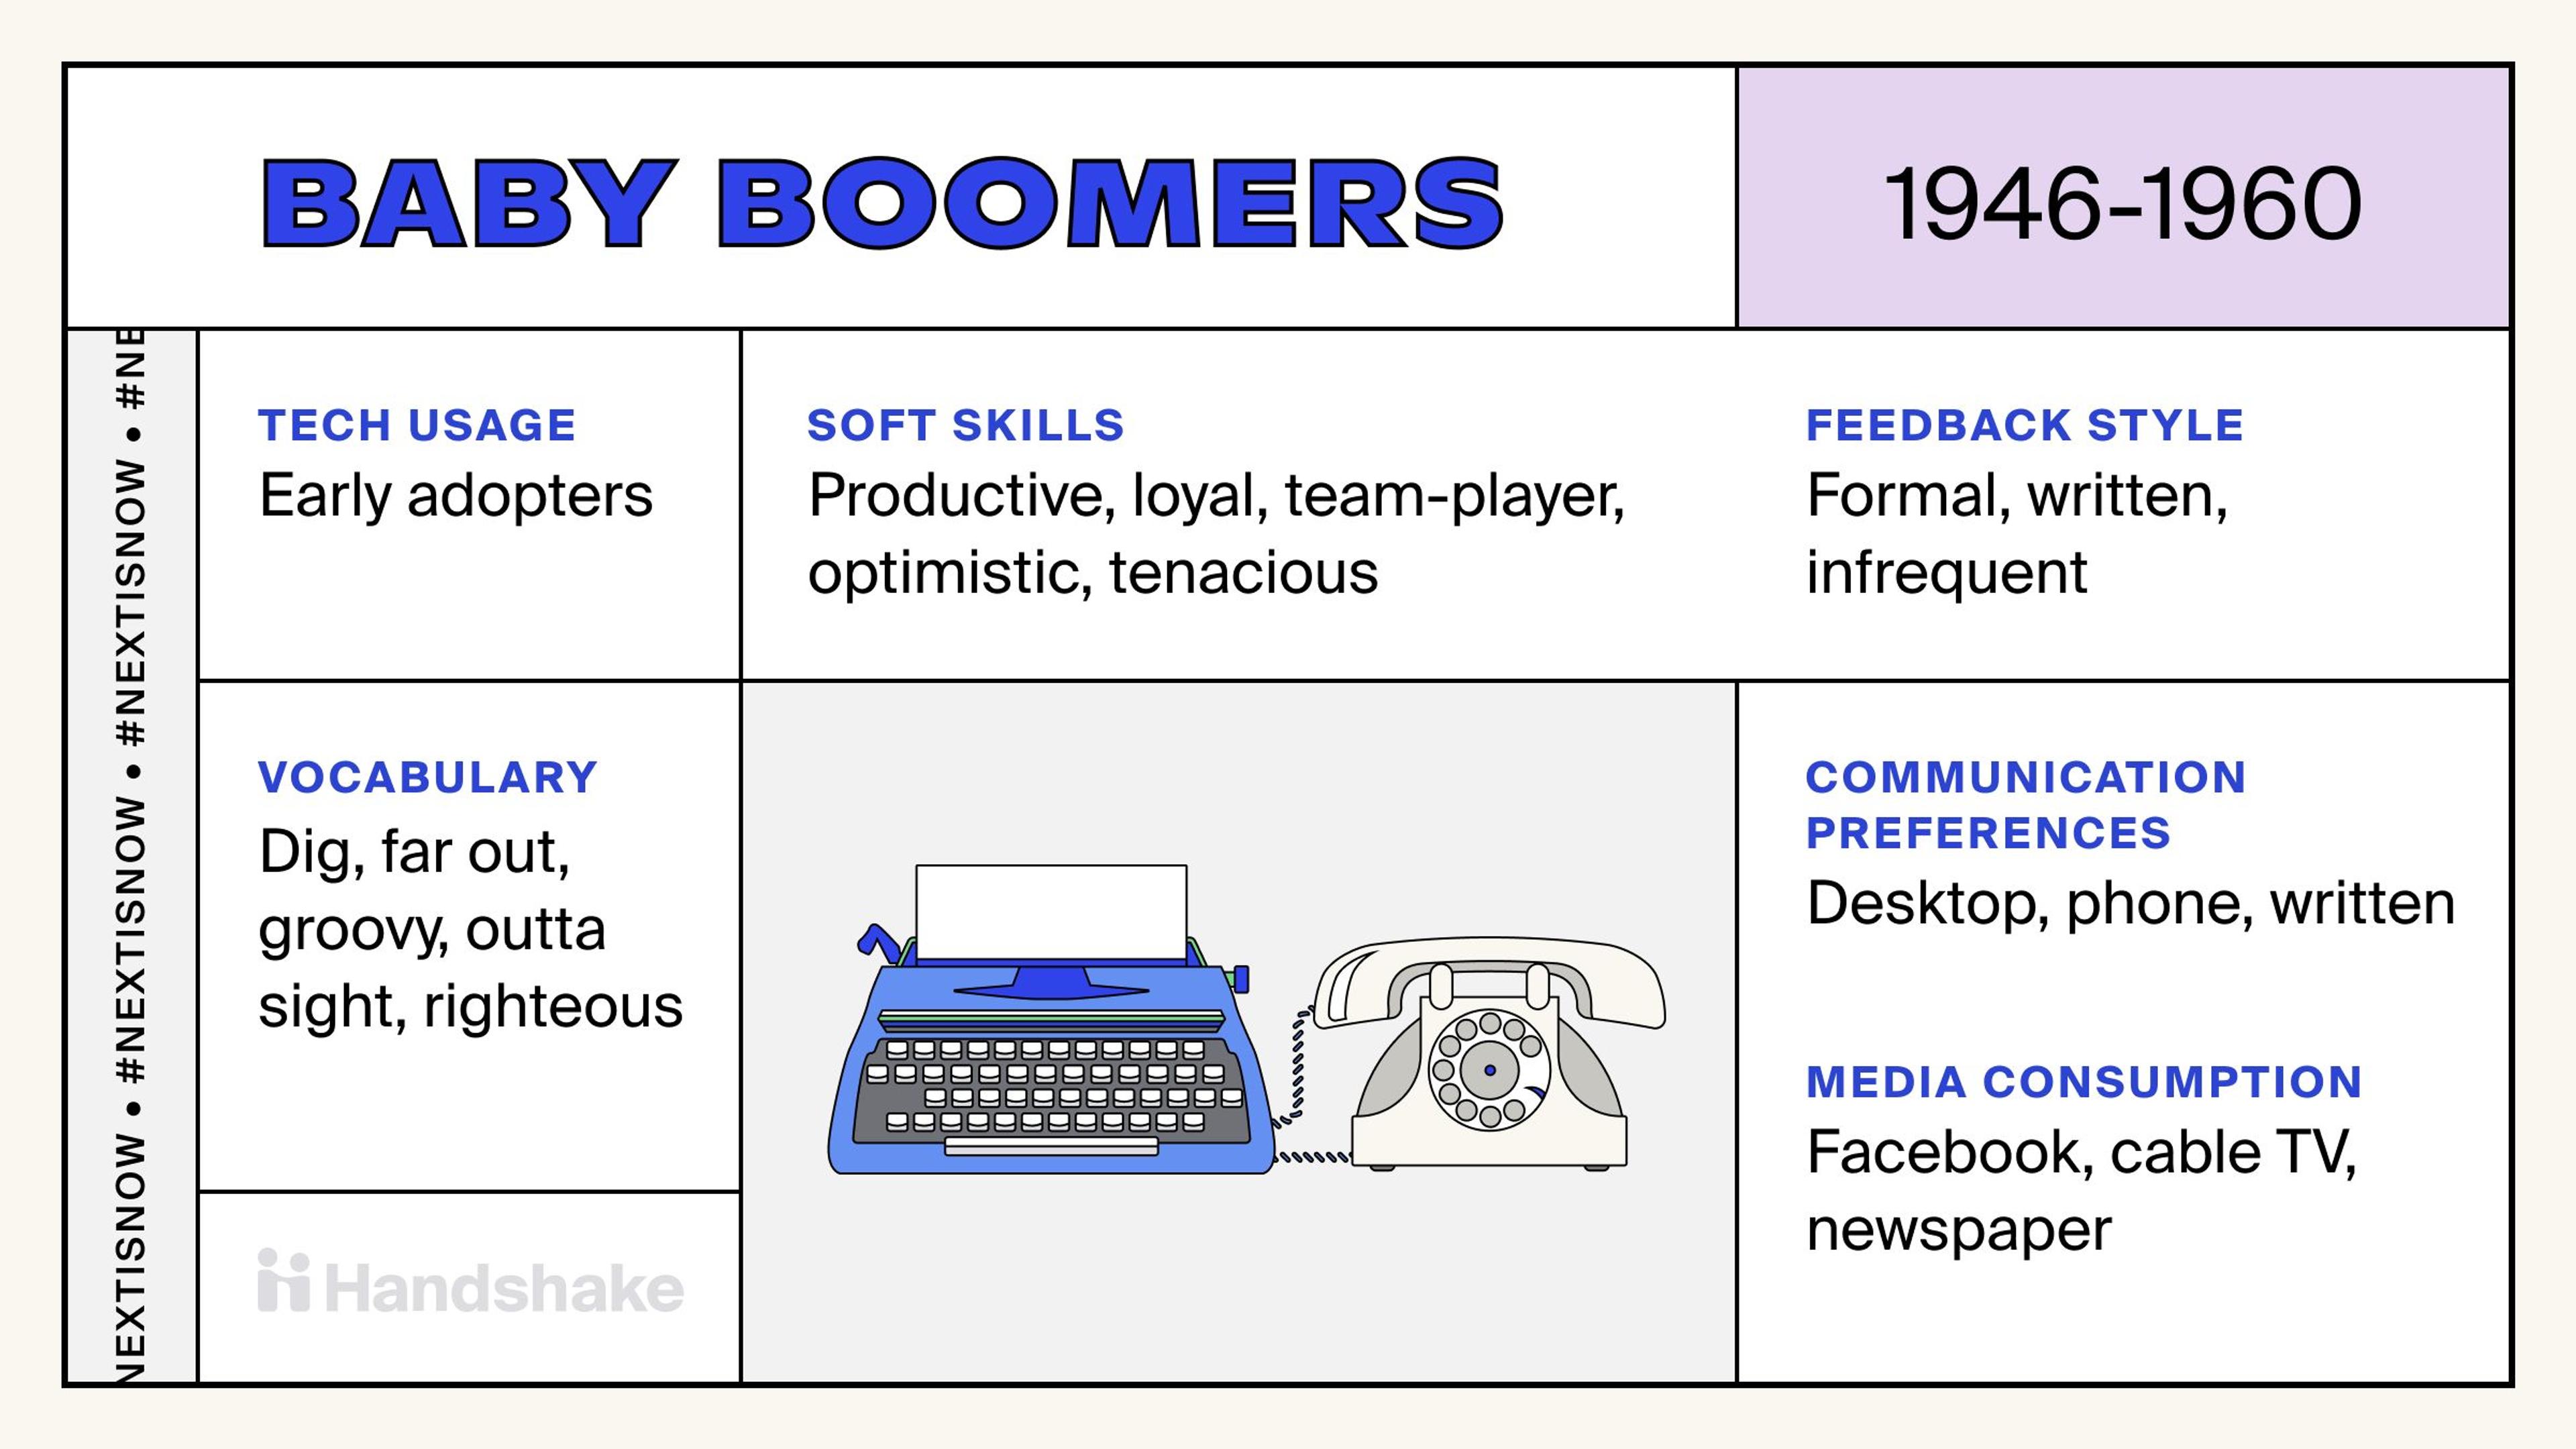 Baby Boomers trading card